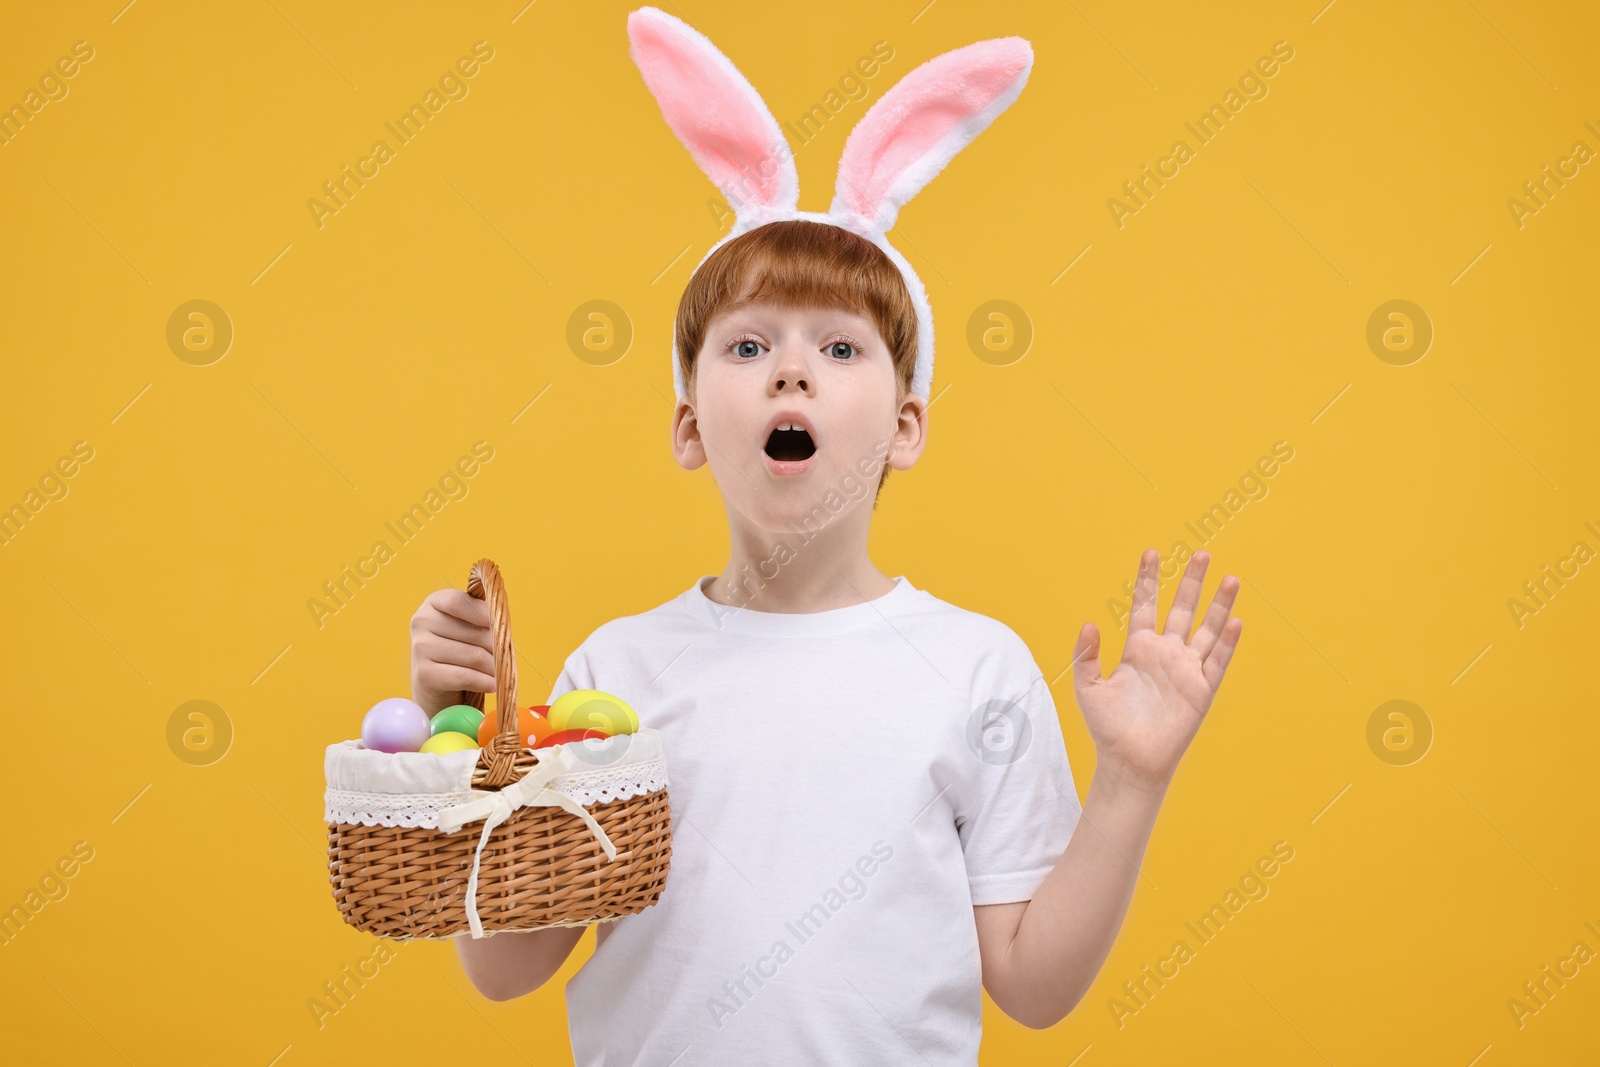 Photo of Easter celebration. Surprised little boy with bunny ears and wicker basket full of painted eggs on orange background